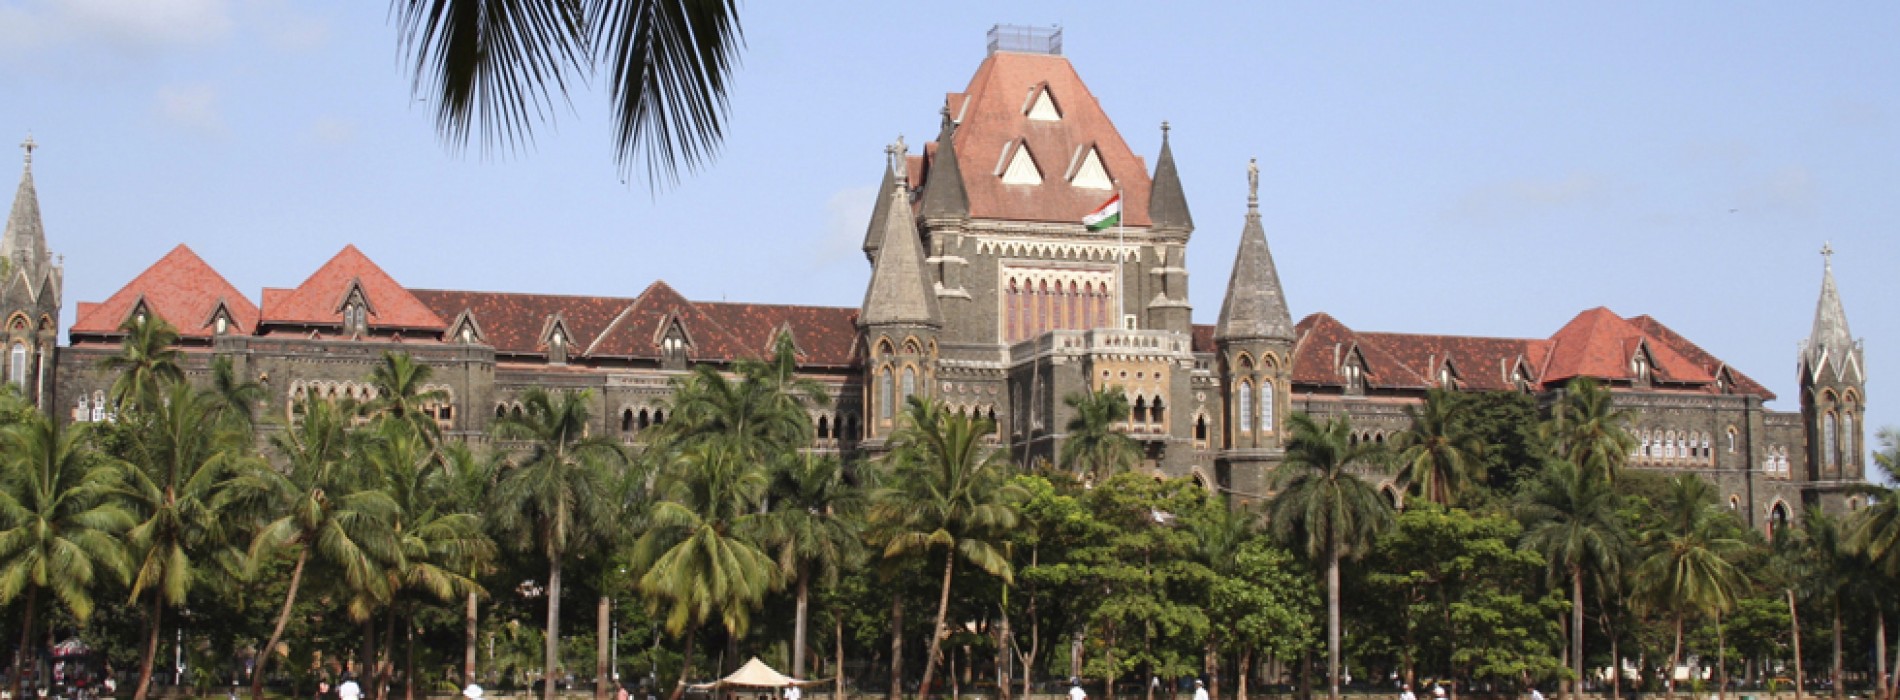 Bombay HC asks Maharashtra government why villagers not allowed to offer B&B?